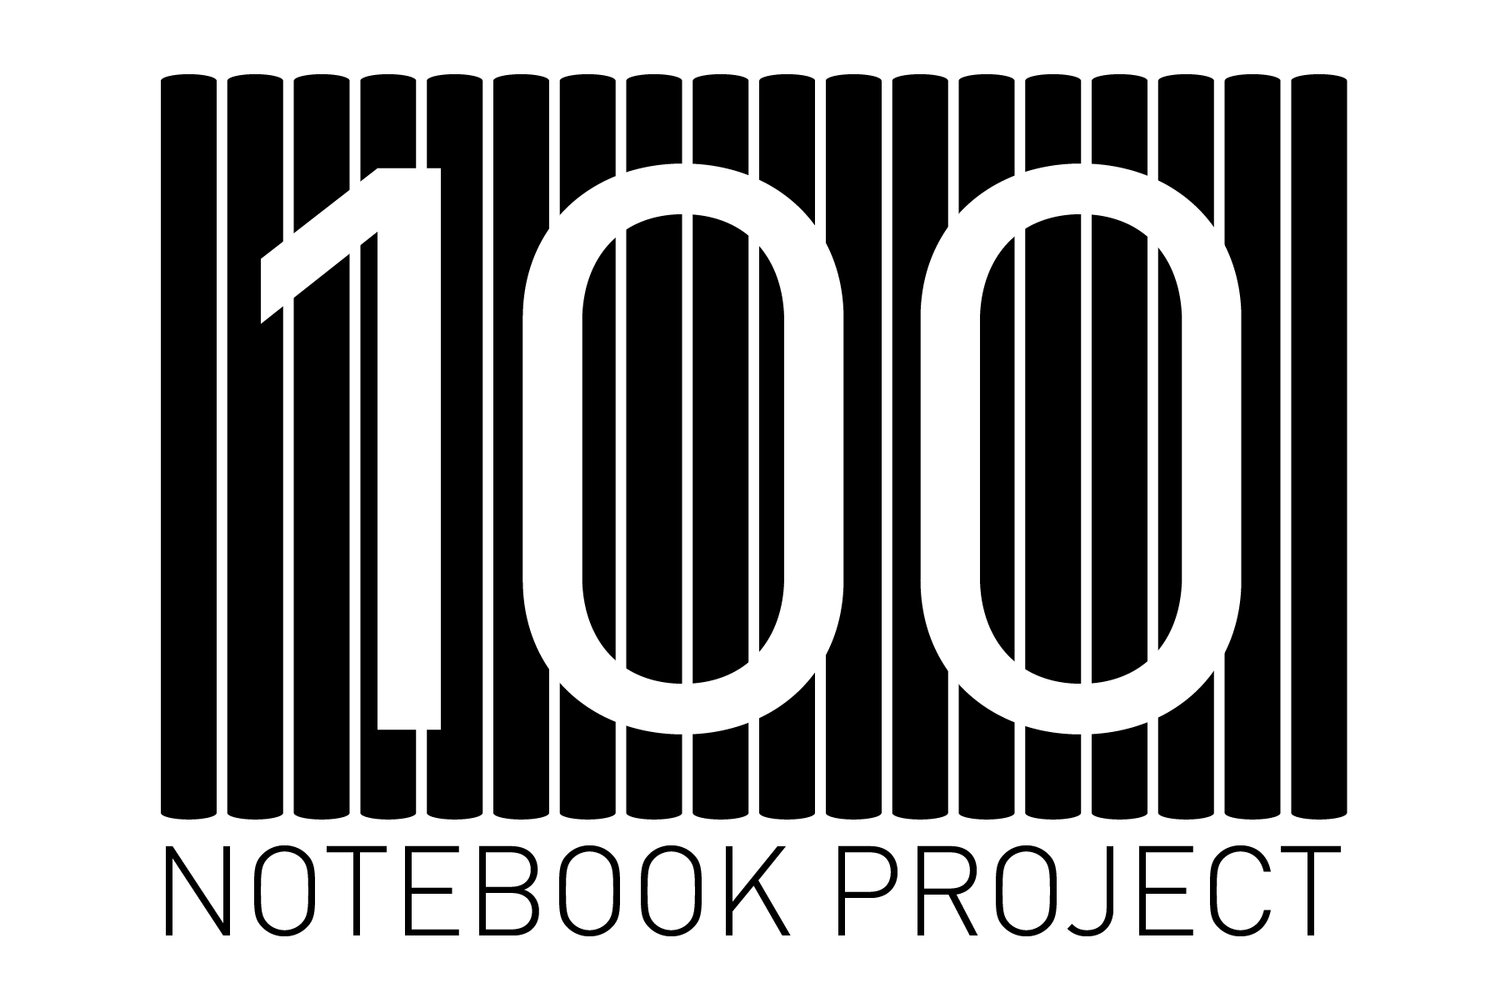 100 NOTEBOOK PROJECT